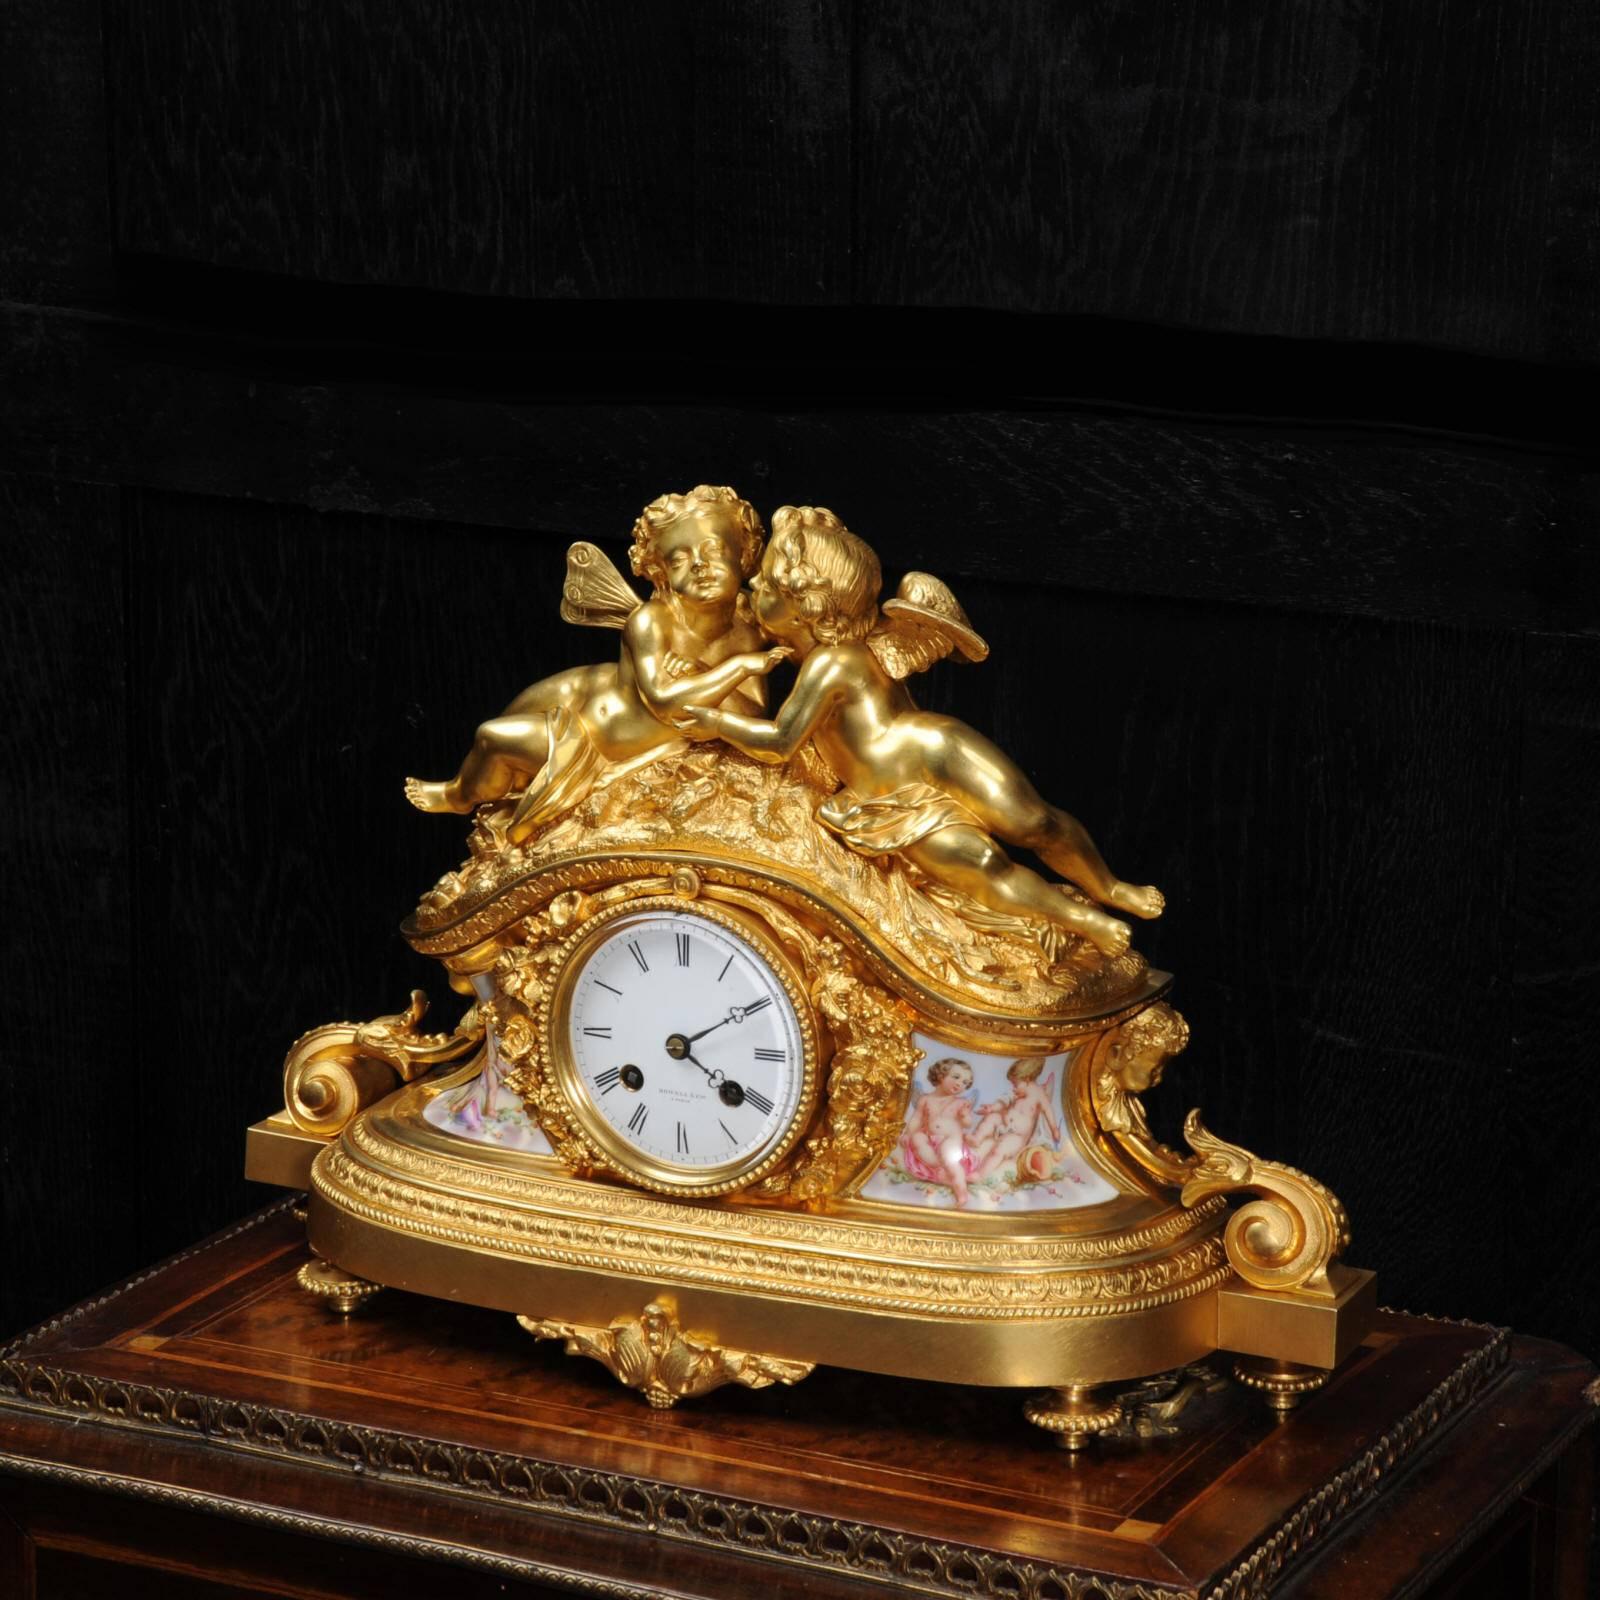 Baroque Fine and Early Ormolu and Porcelain Clock, Cherubs